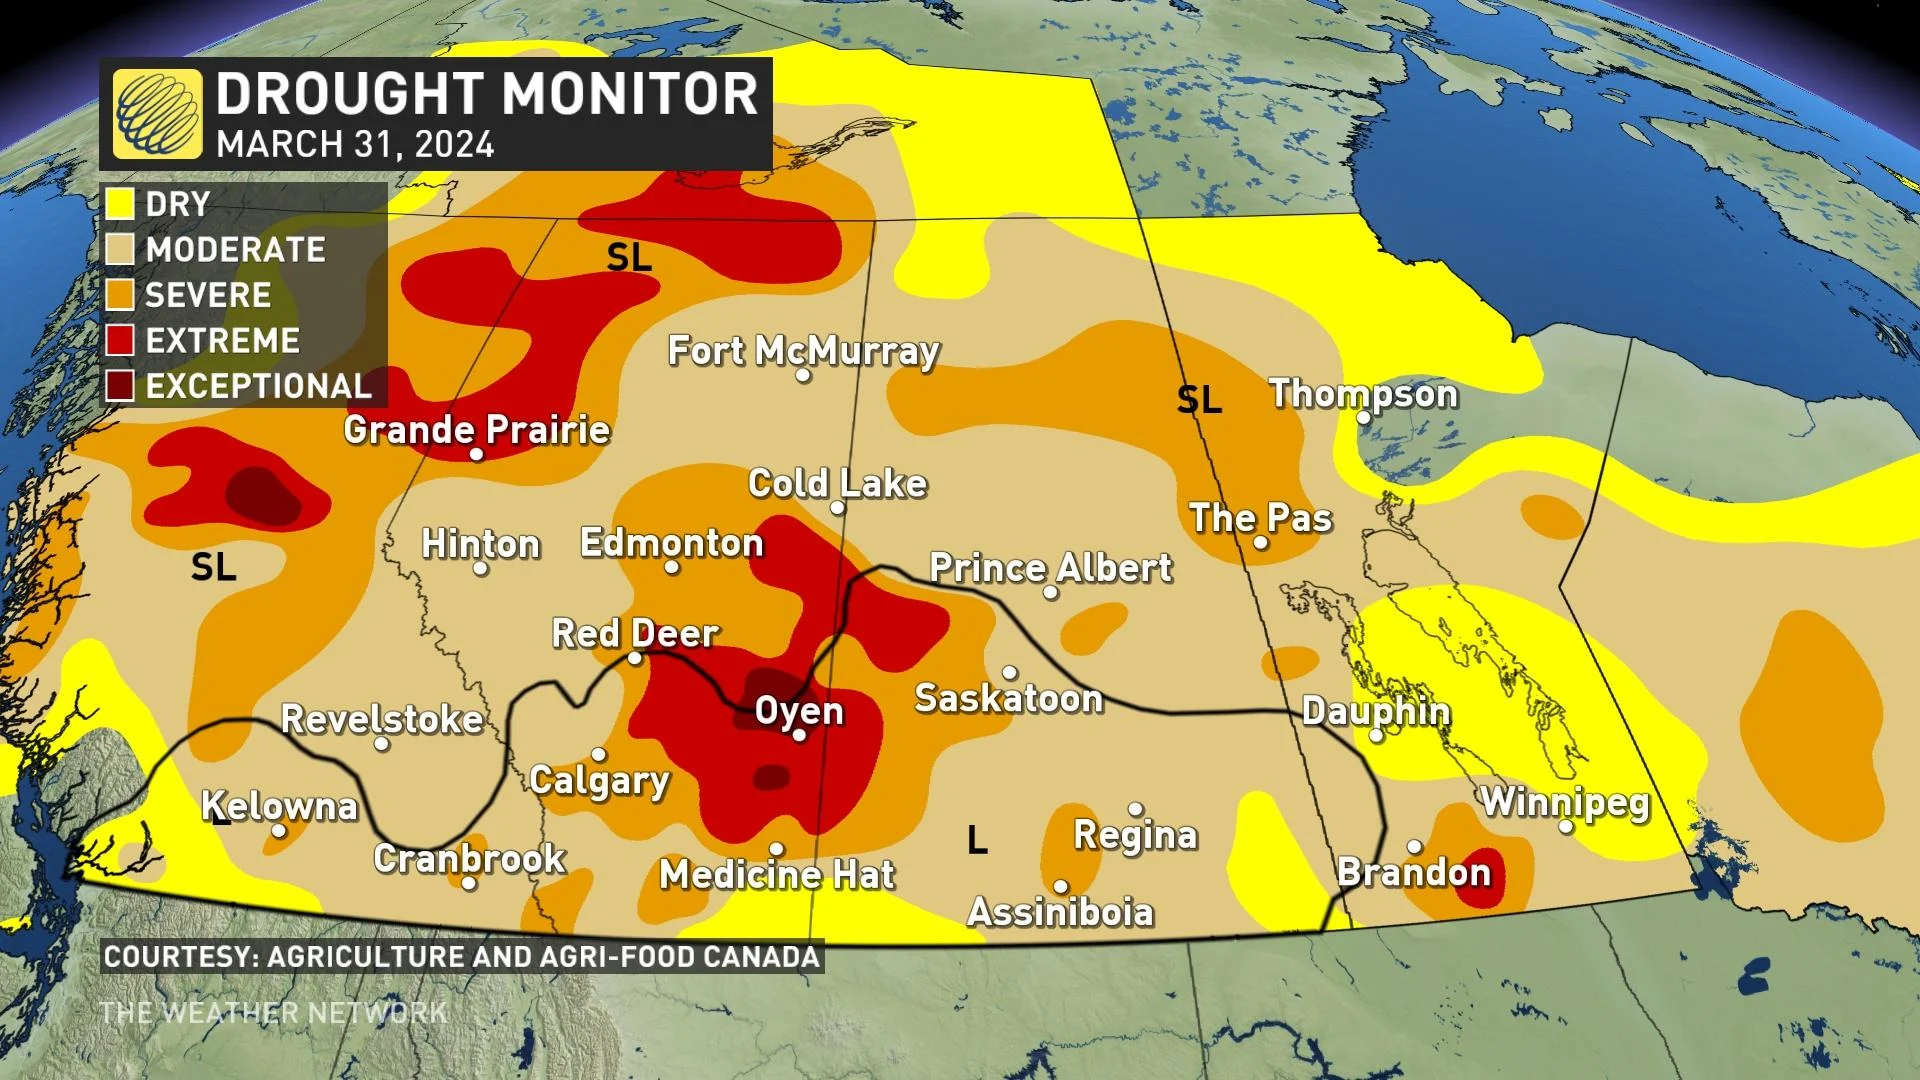 Prairies drought monitor map (March 31) April 14 update